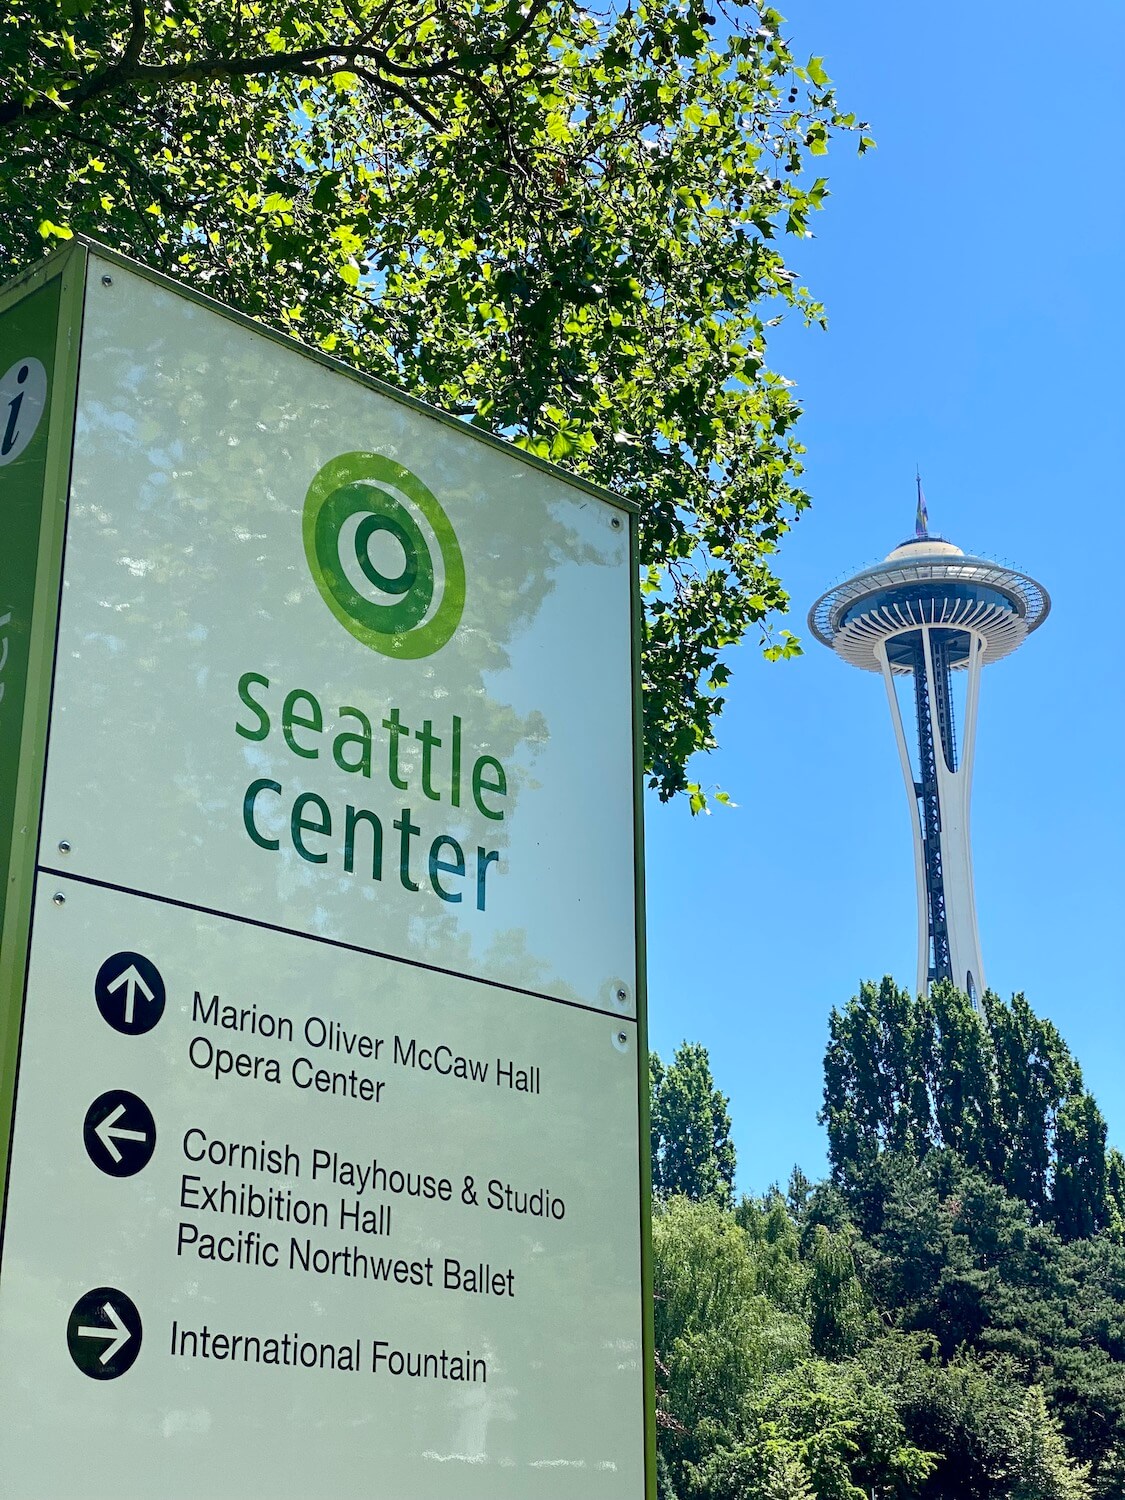 Seattle Center is a fun outdoor thing to do in the Summer. This sign is green and white and says Seattle Center while the Space Needle rises in the background under bright blue skies.